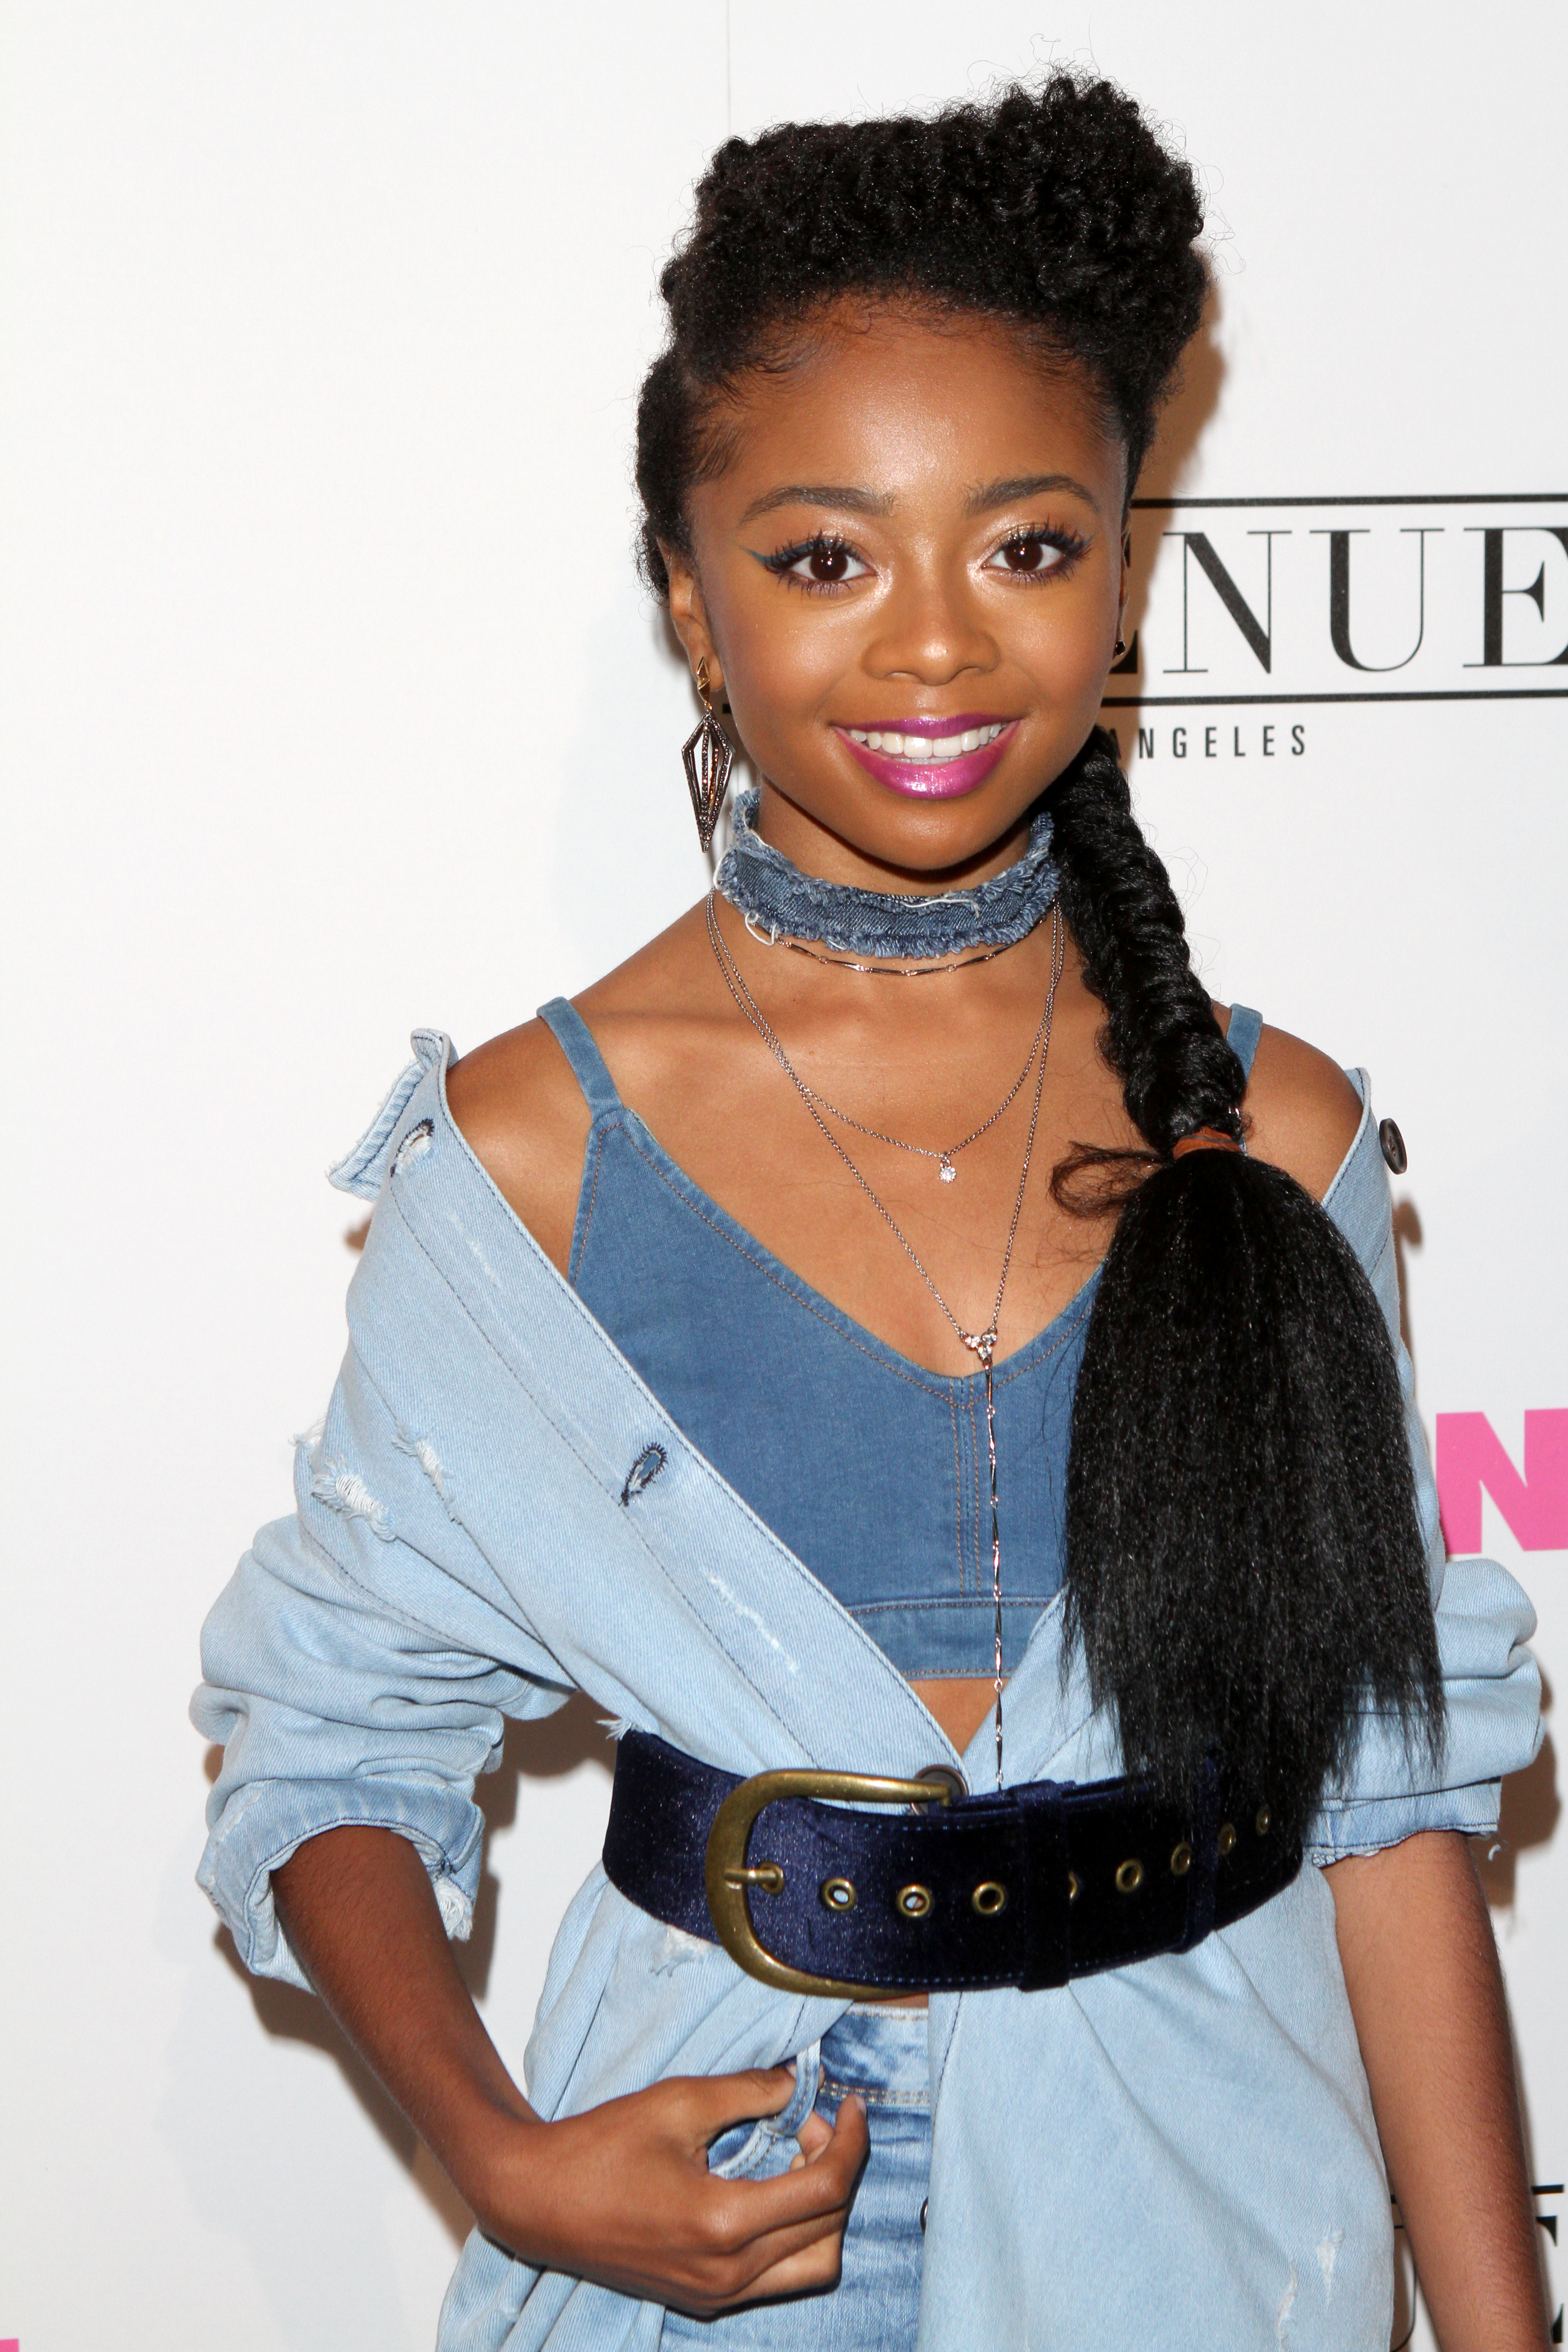 How Old Is Skai Jackson Again? This Girl Is Seriously Mature for Her Age